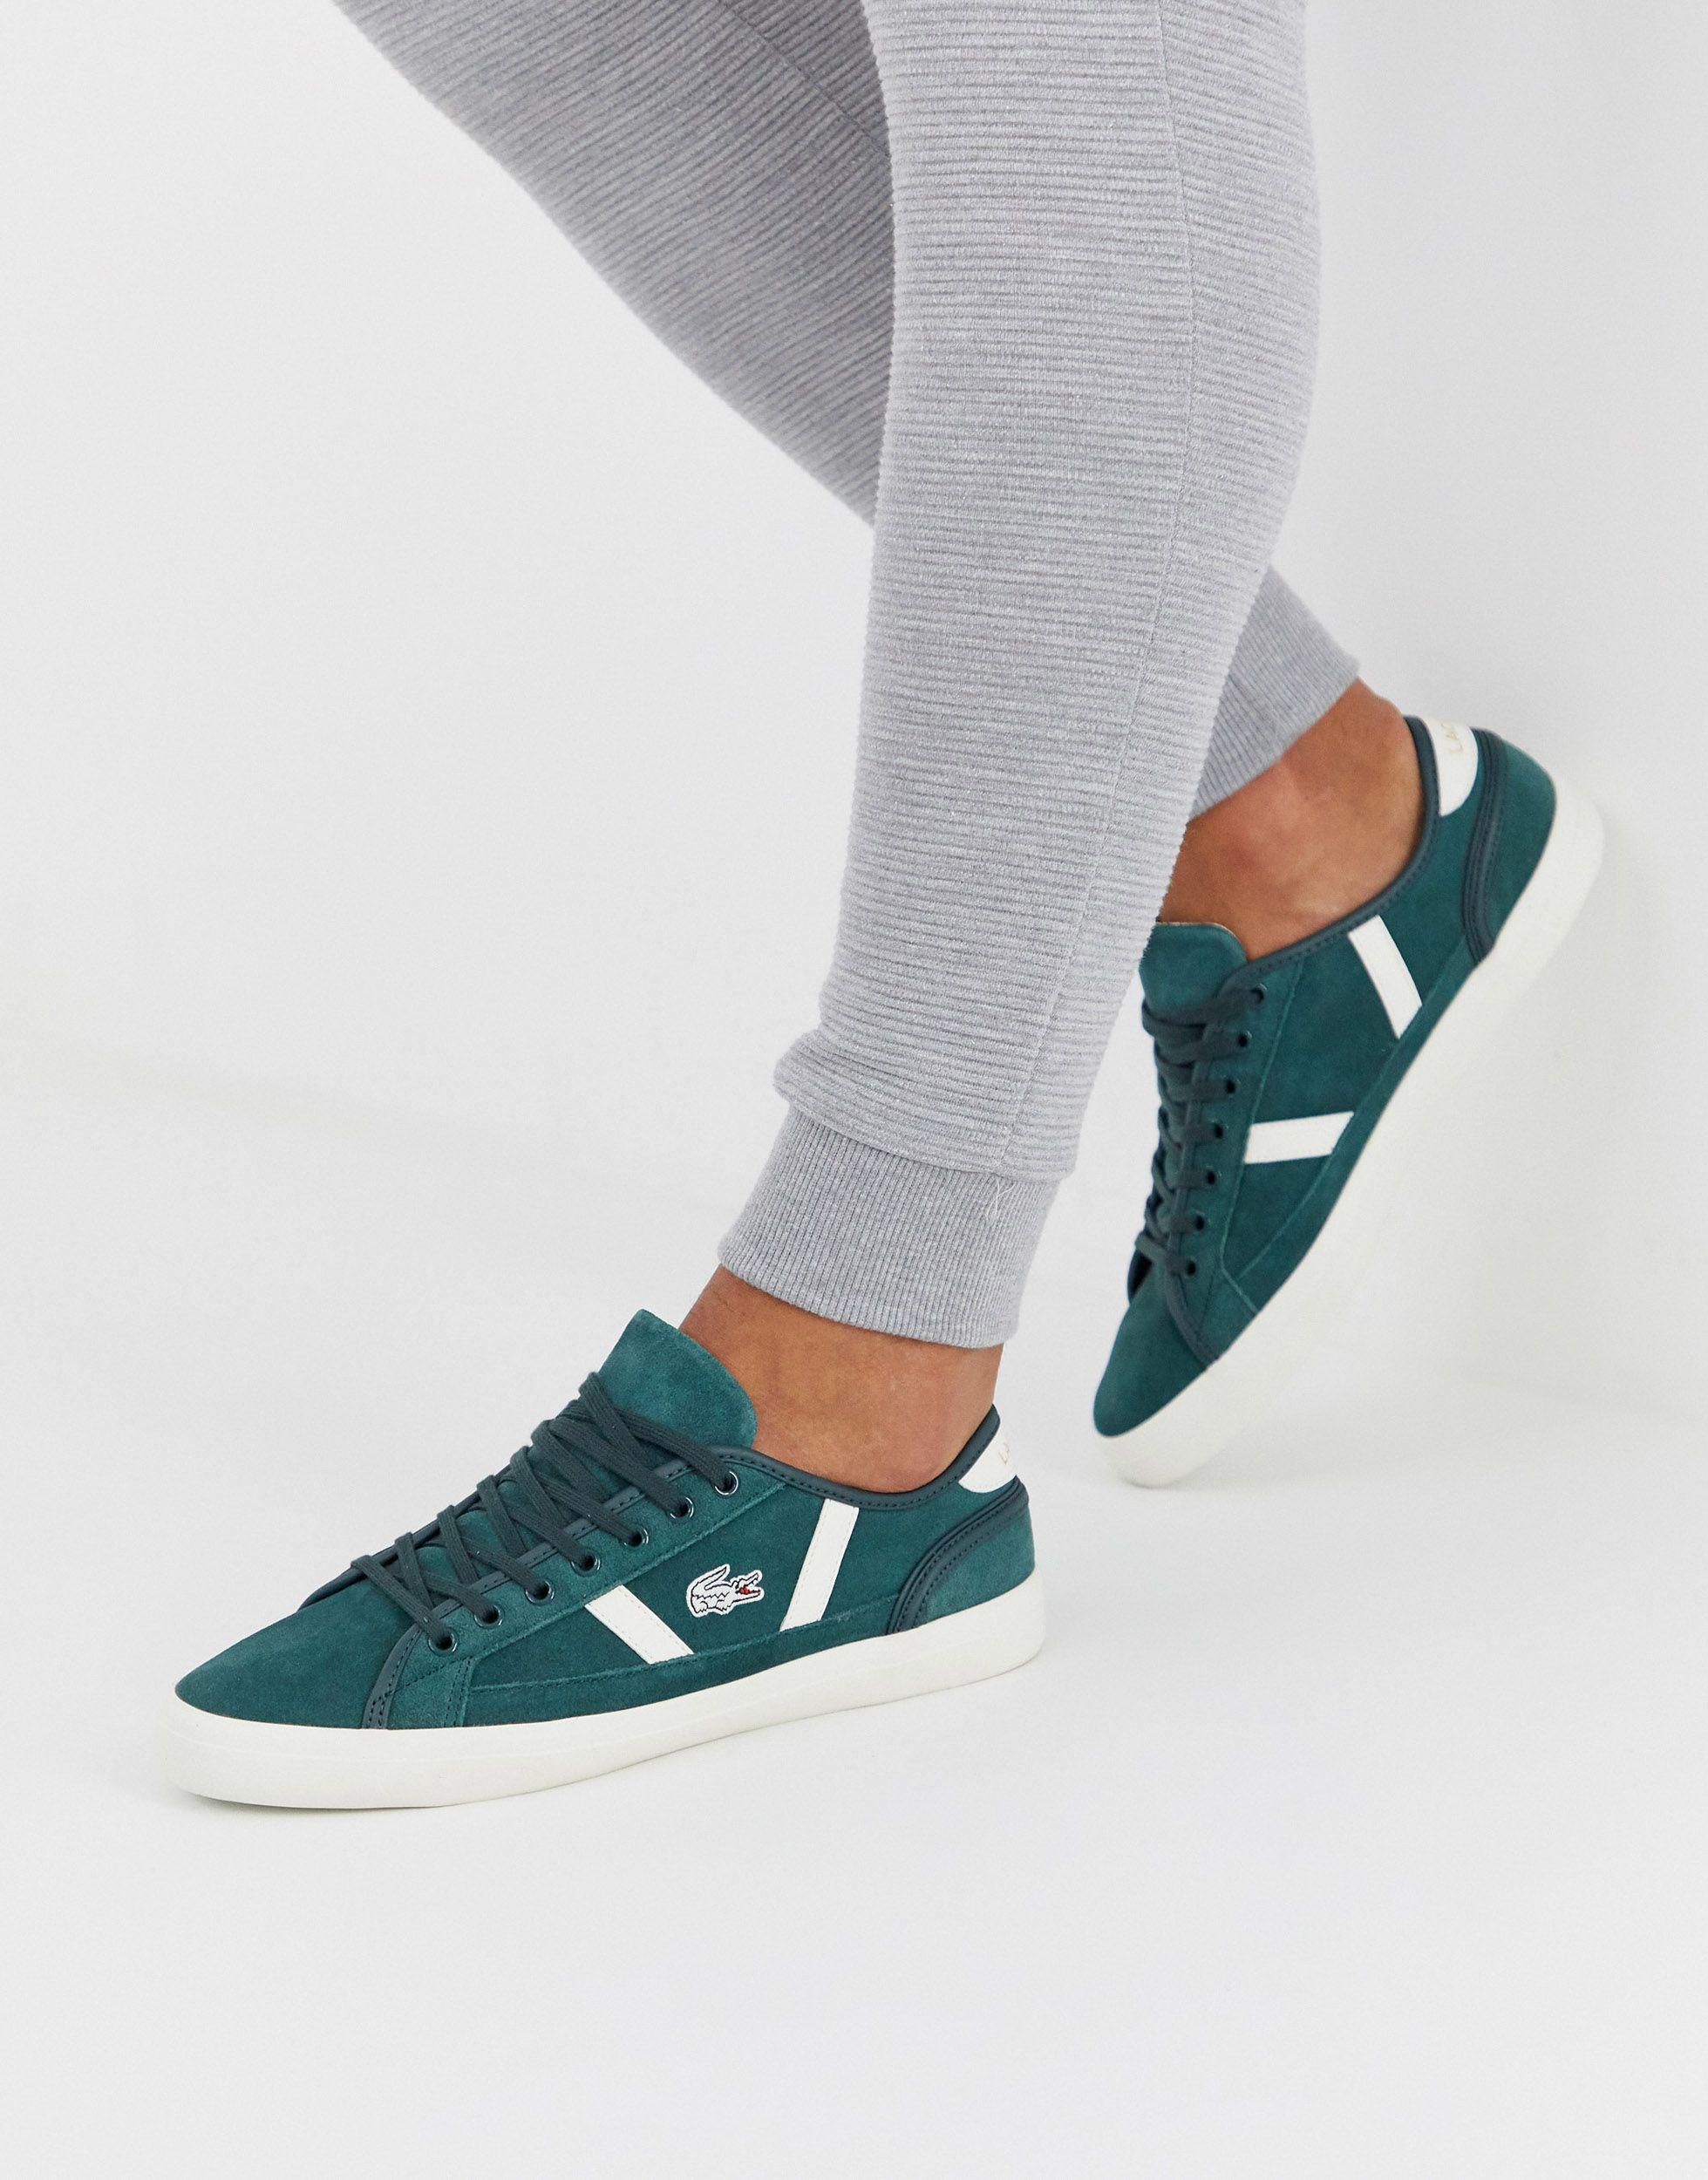 Lacoste Suede Sideline Trainers in Green for Men - Lyst